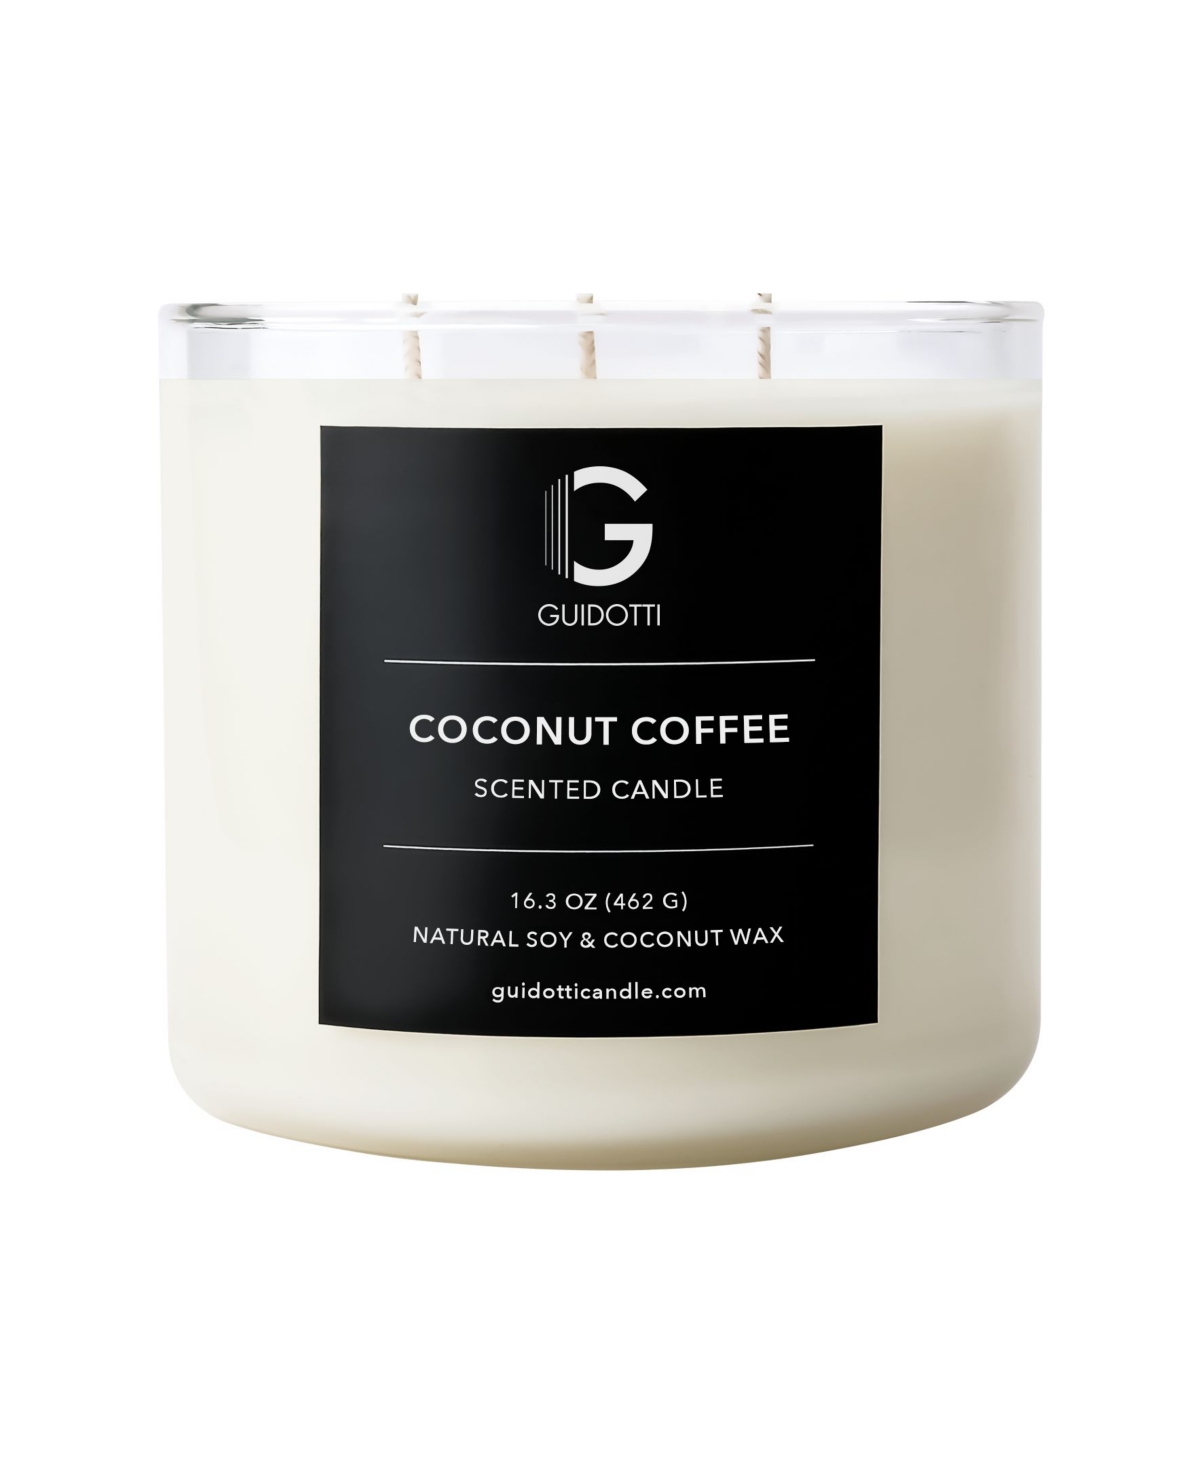 Coconut Coffee Scented Candle, 3-Wick, 16.3 oz